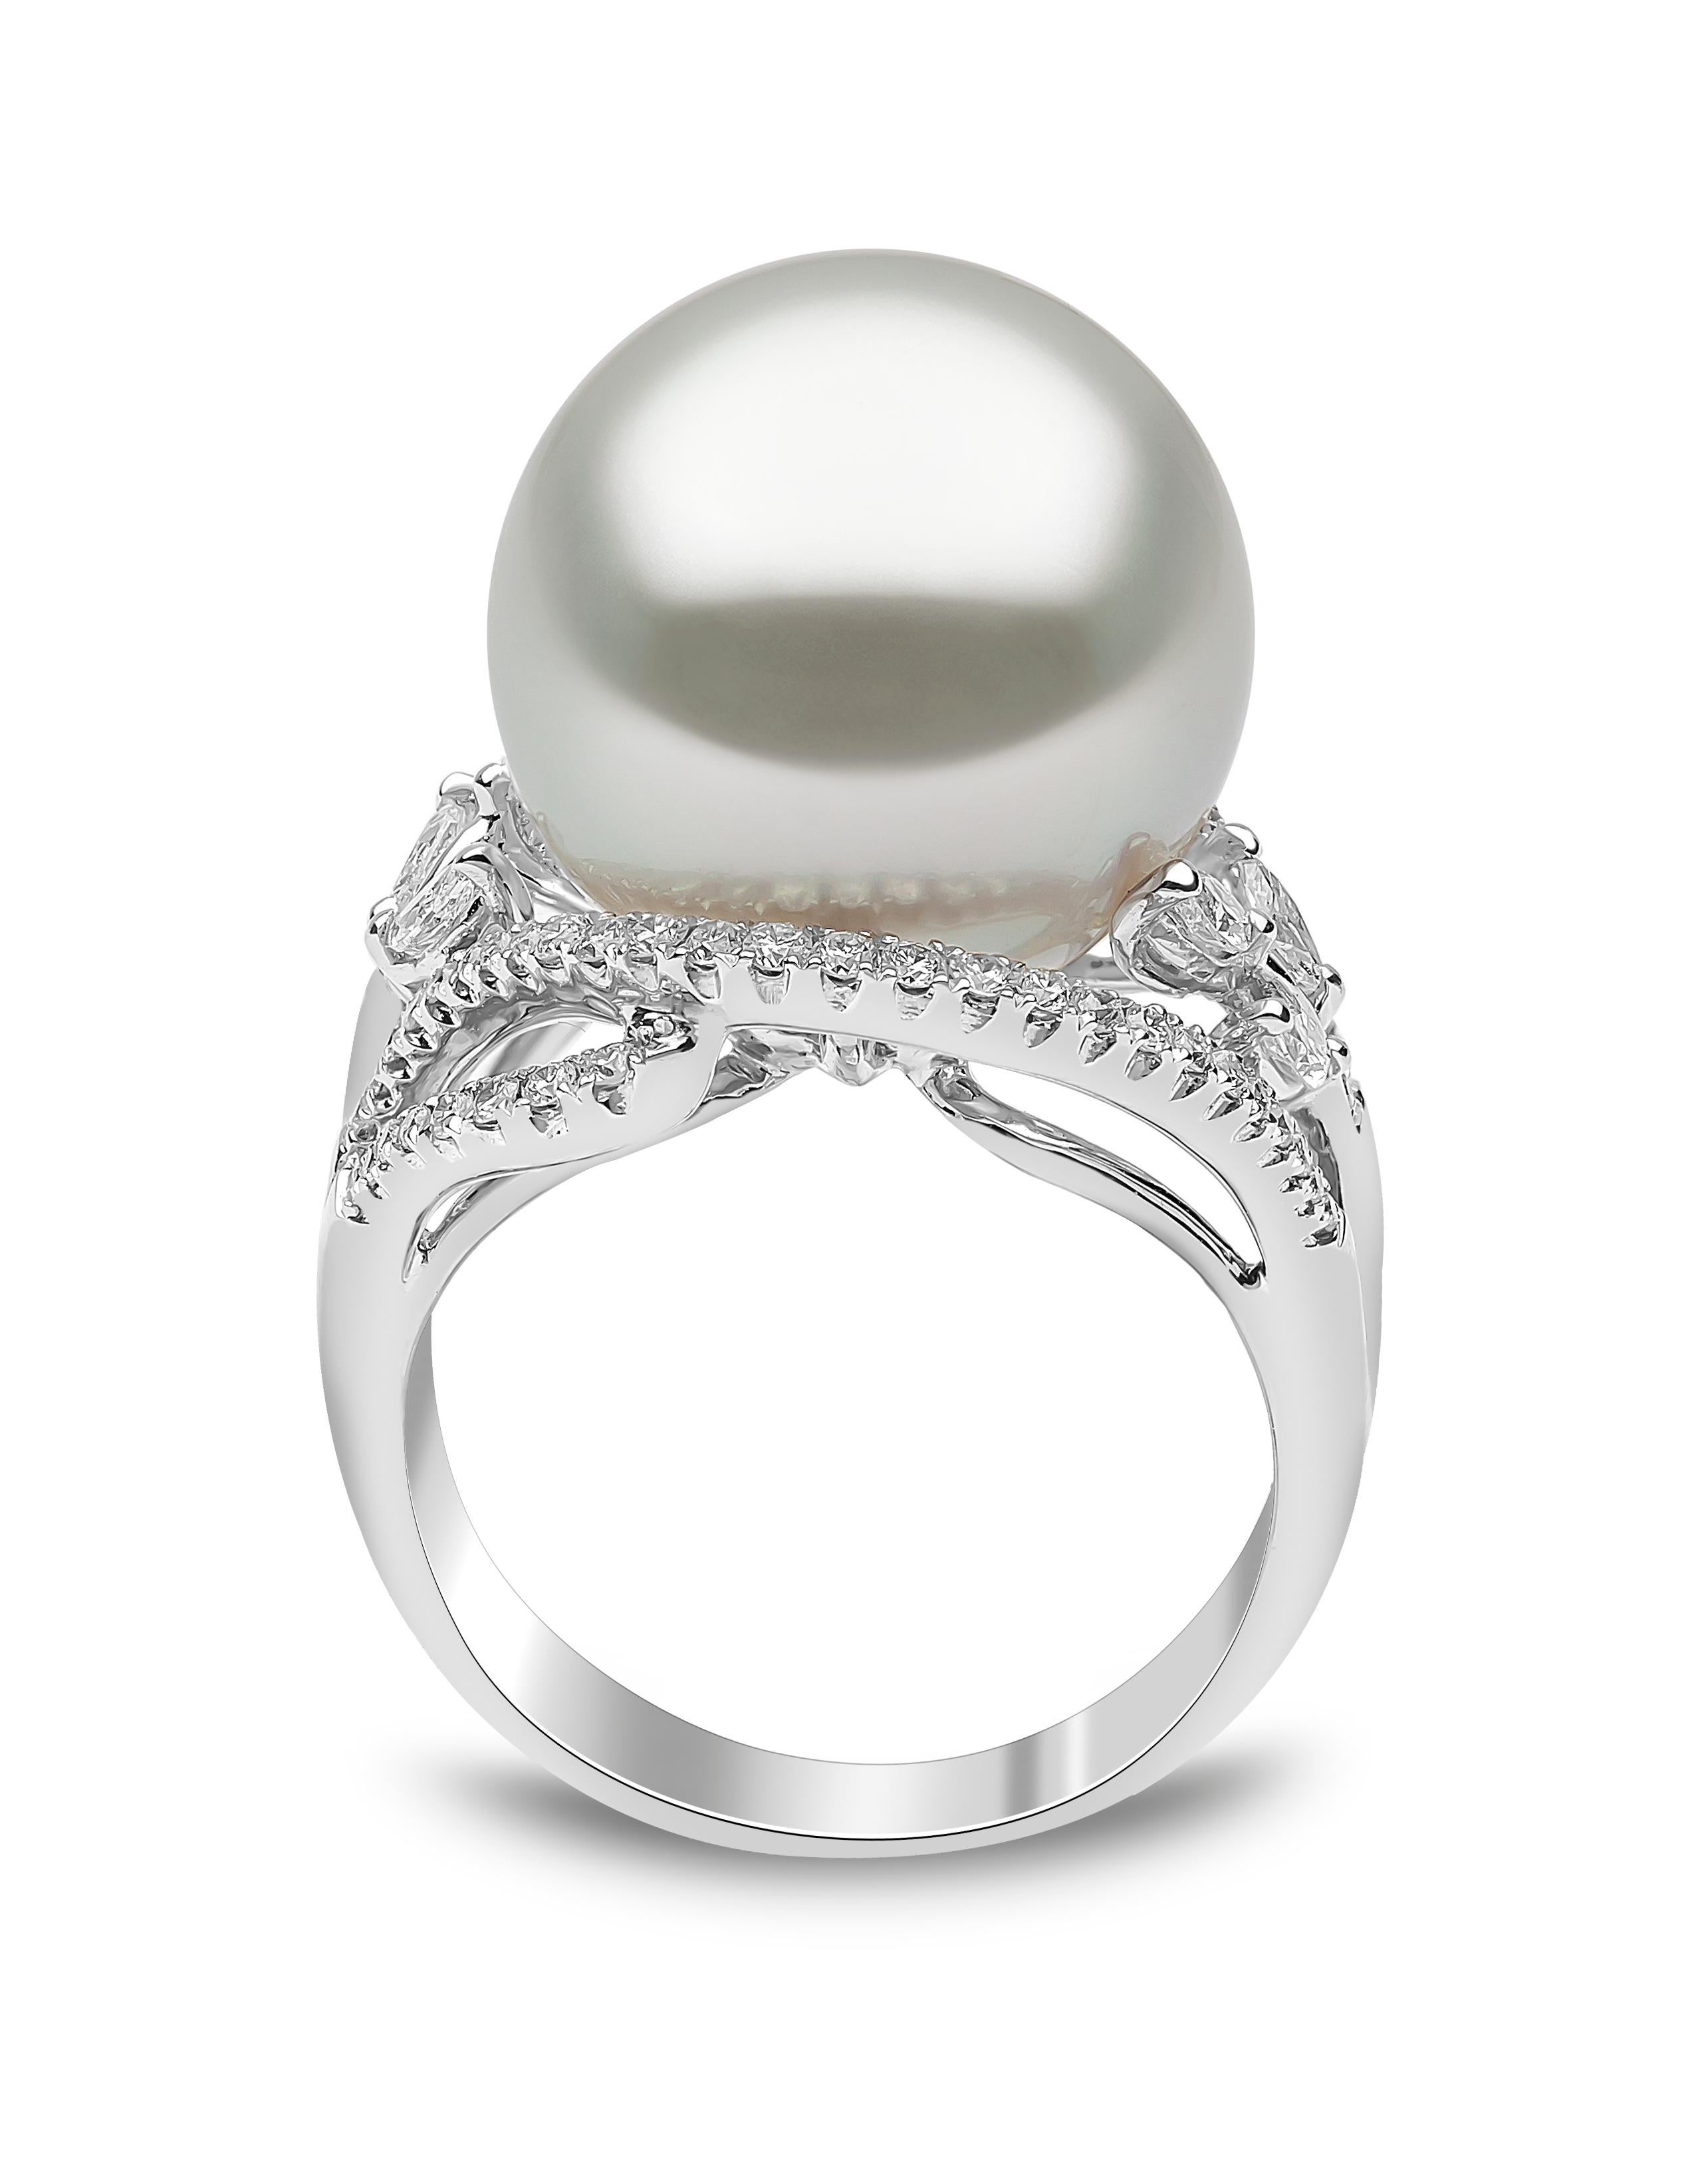 This ornate ring by Yoko London features a lustrous South Sea pearl set amongst a floral arrangement of round brilliant and marquise cut diamonds. The 18 Karat white gold setting perfectly enhances the radiance of the pearl and the sparkle of the